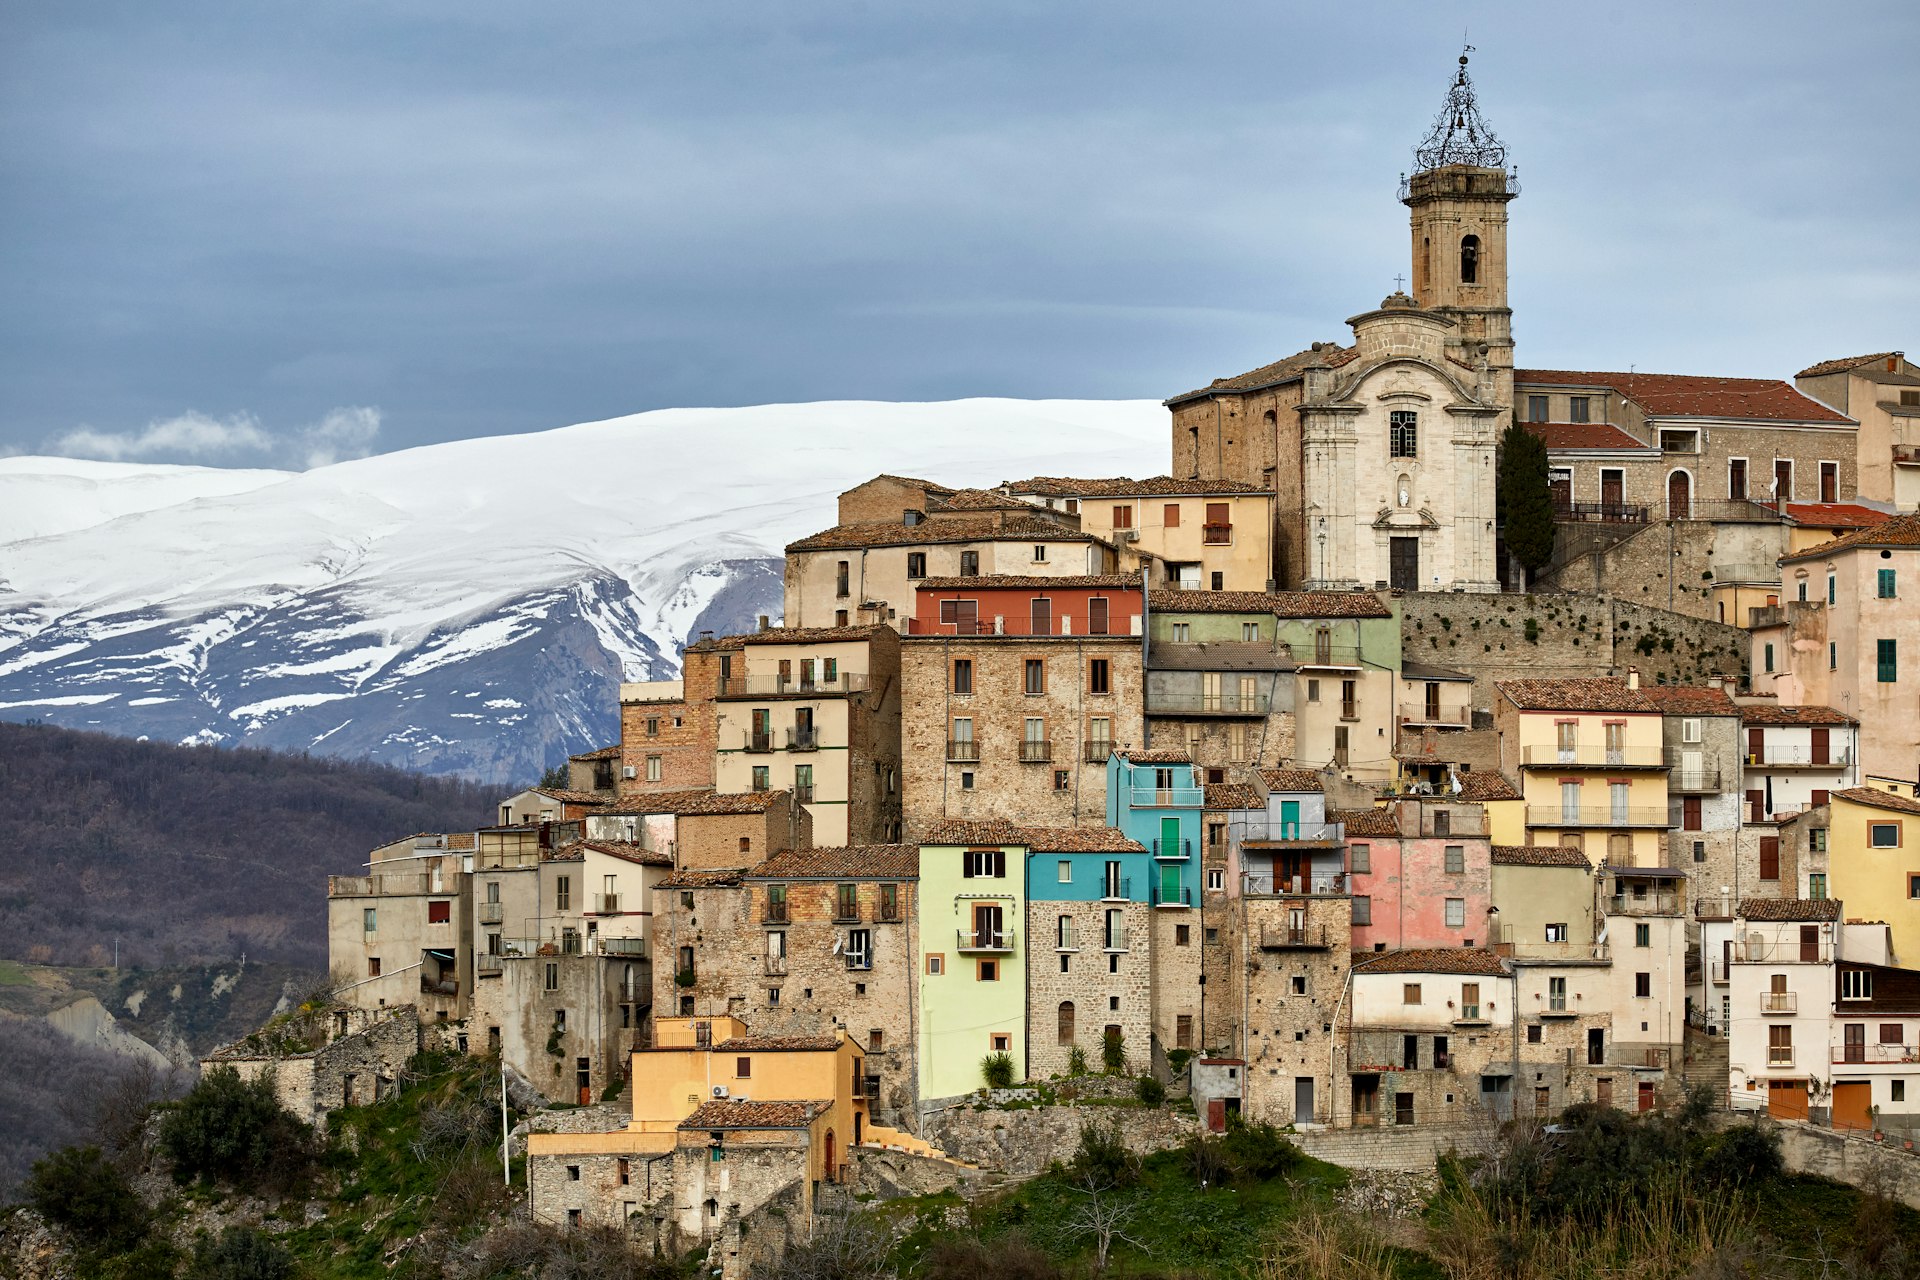 The village of Colledimezzo with mountains in the background, Abruzzo, Italy